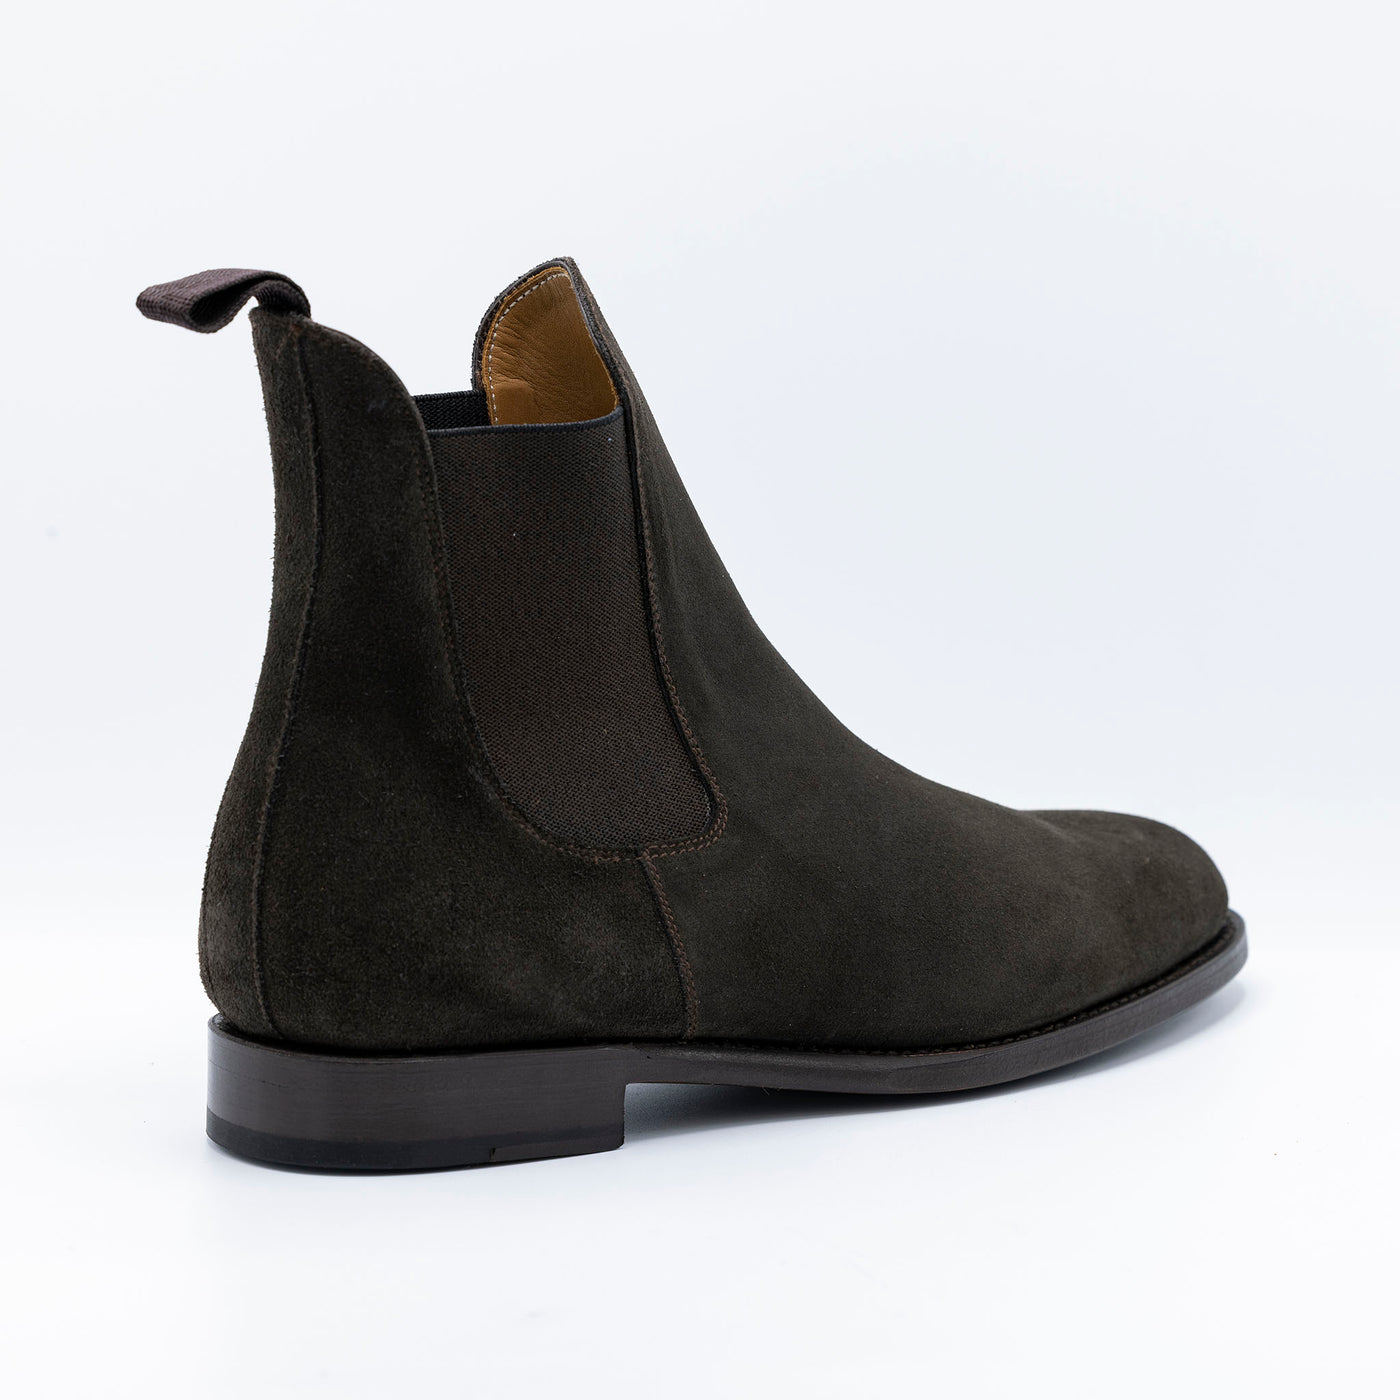 Men's brown suede chelsea boots. Set on leather soles with elastic panels. 